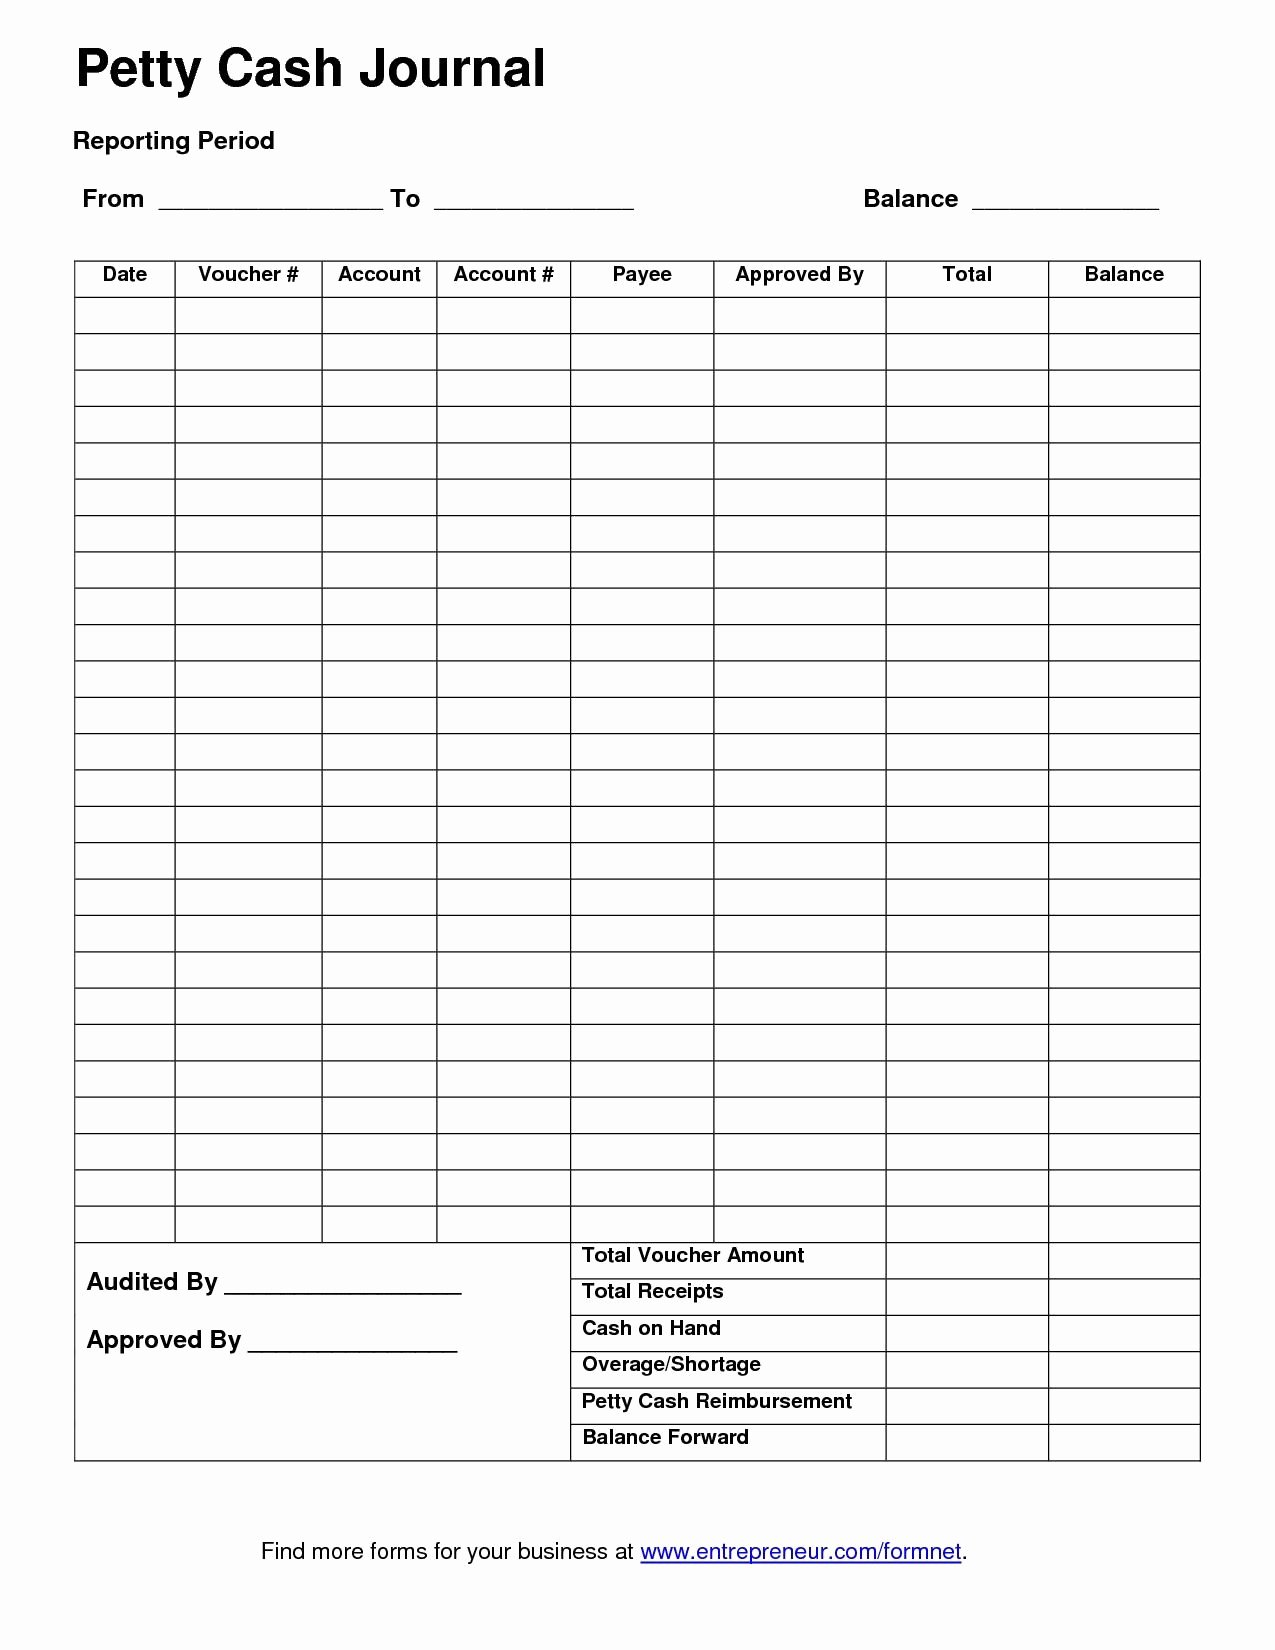 Daily Cash Report Template Excel Inspirational Cash Report Template Portablegasgrillweber